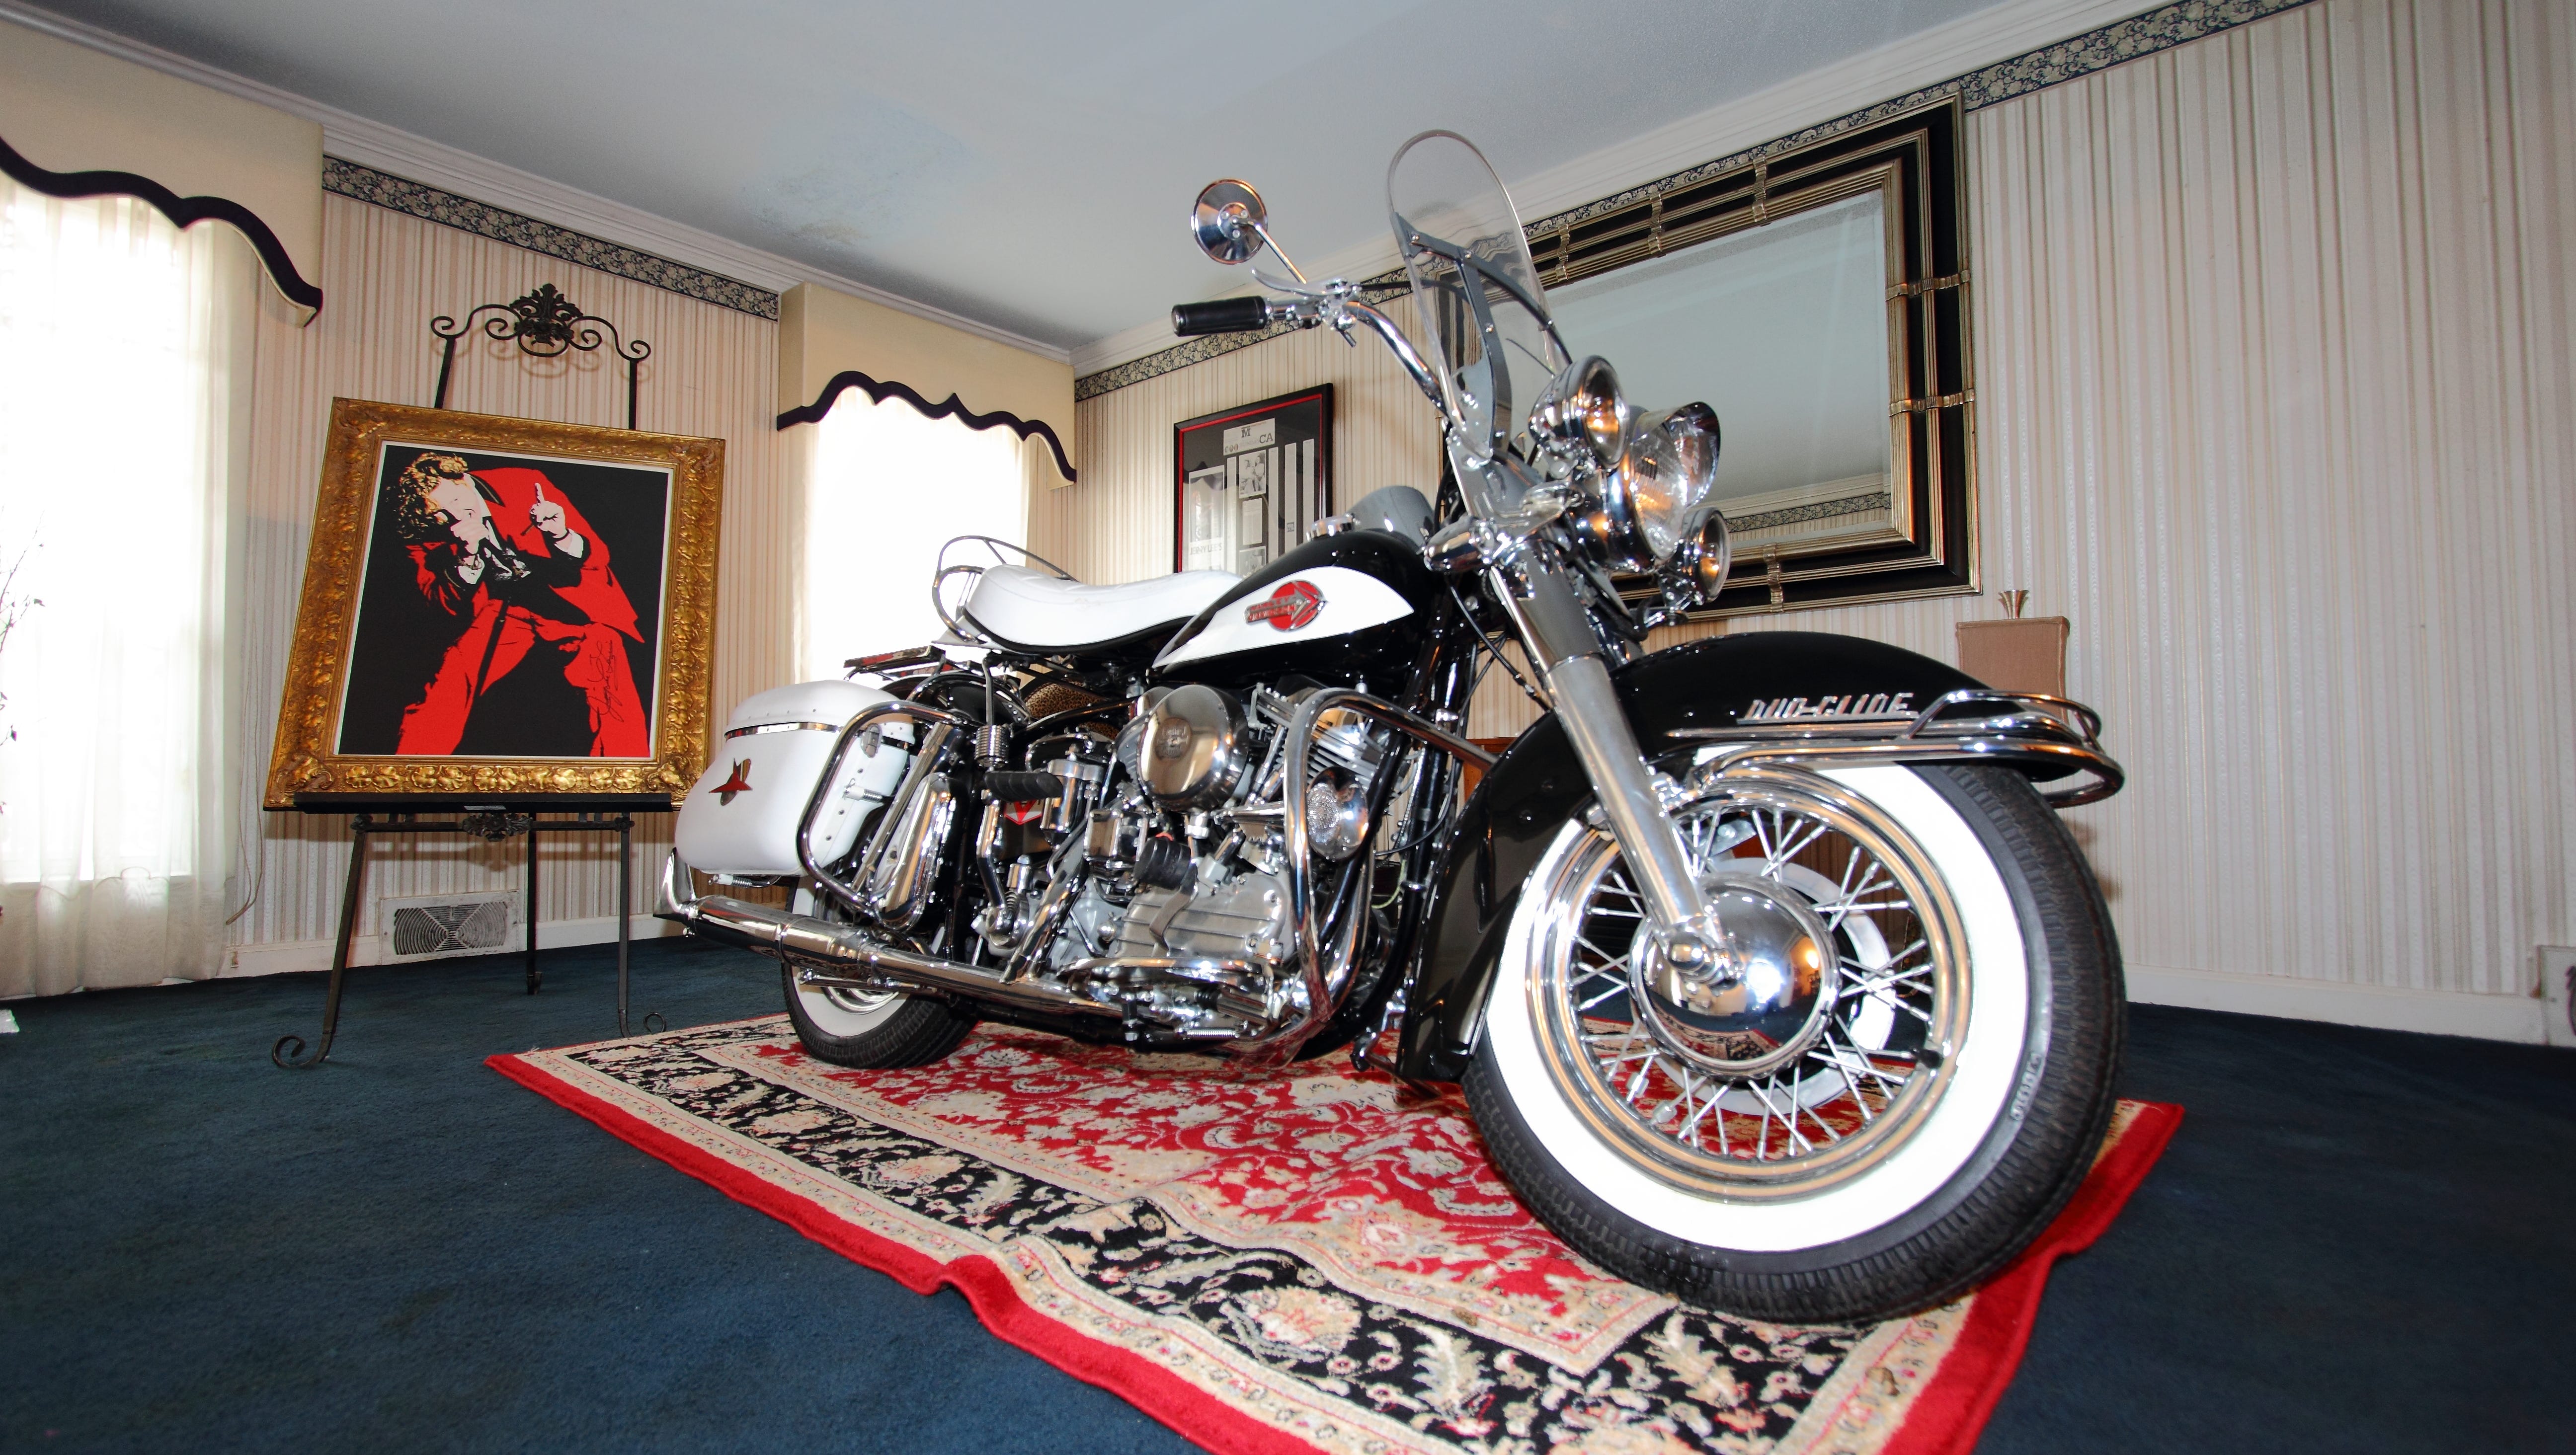 Jerry Lee Lewis' '59 Harley could fetch $1 million